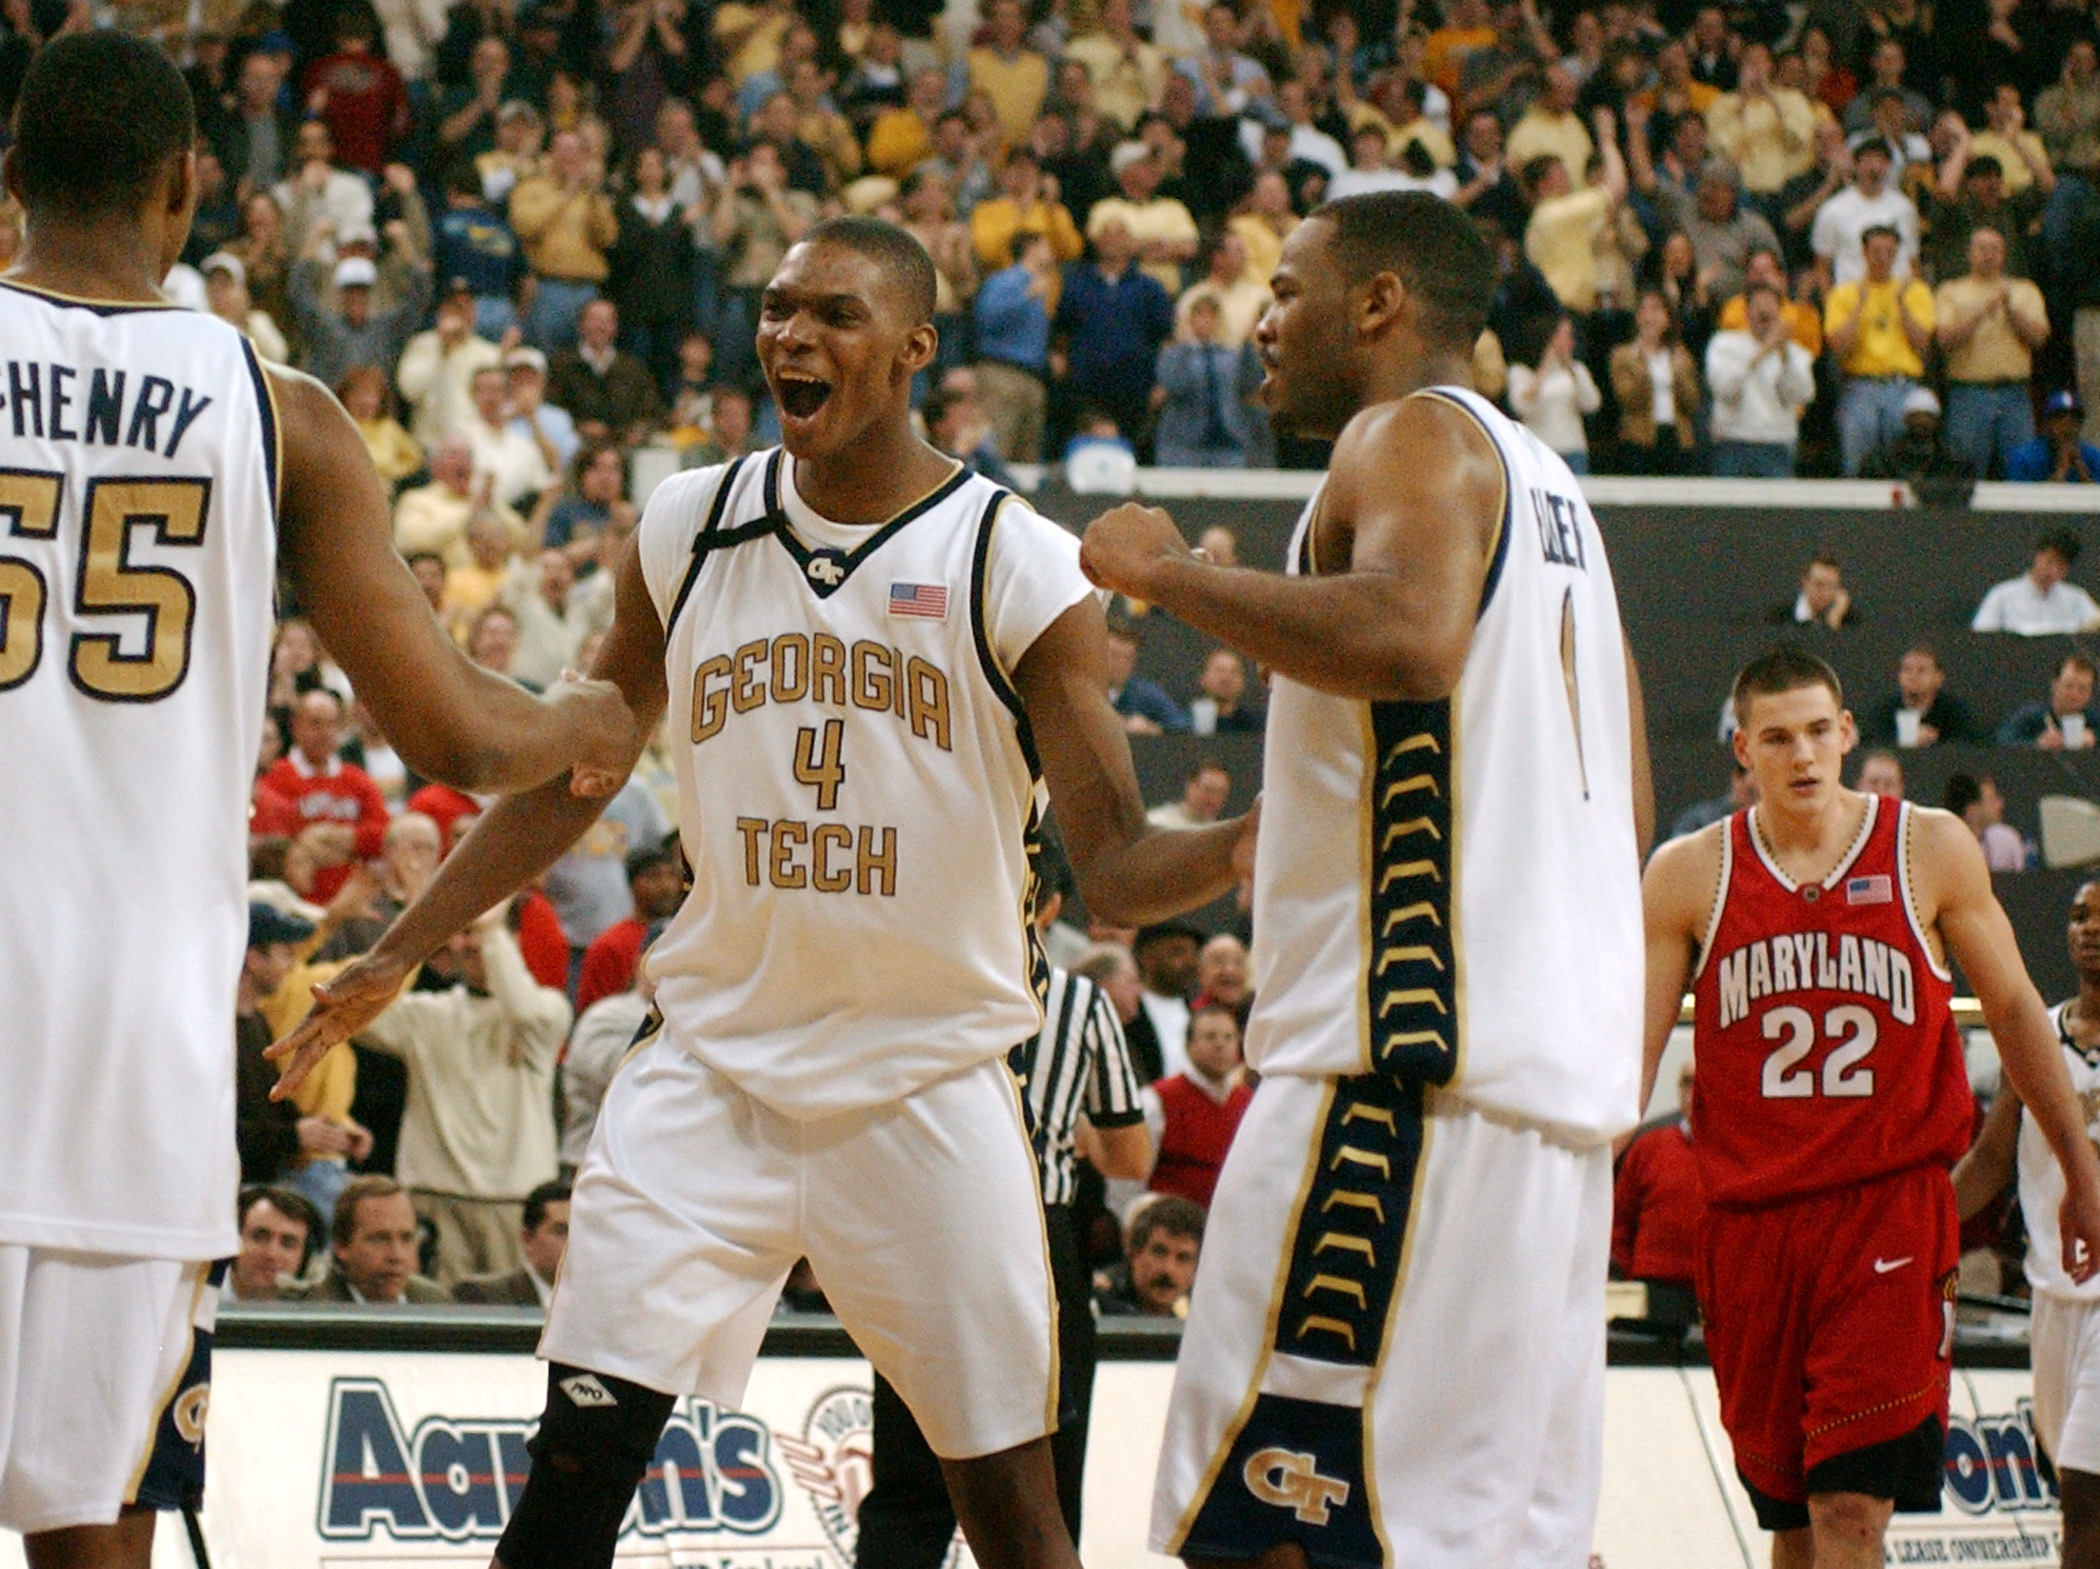 Former Tech star Chris Bosh a finalist for Naismith Hall of Fame